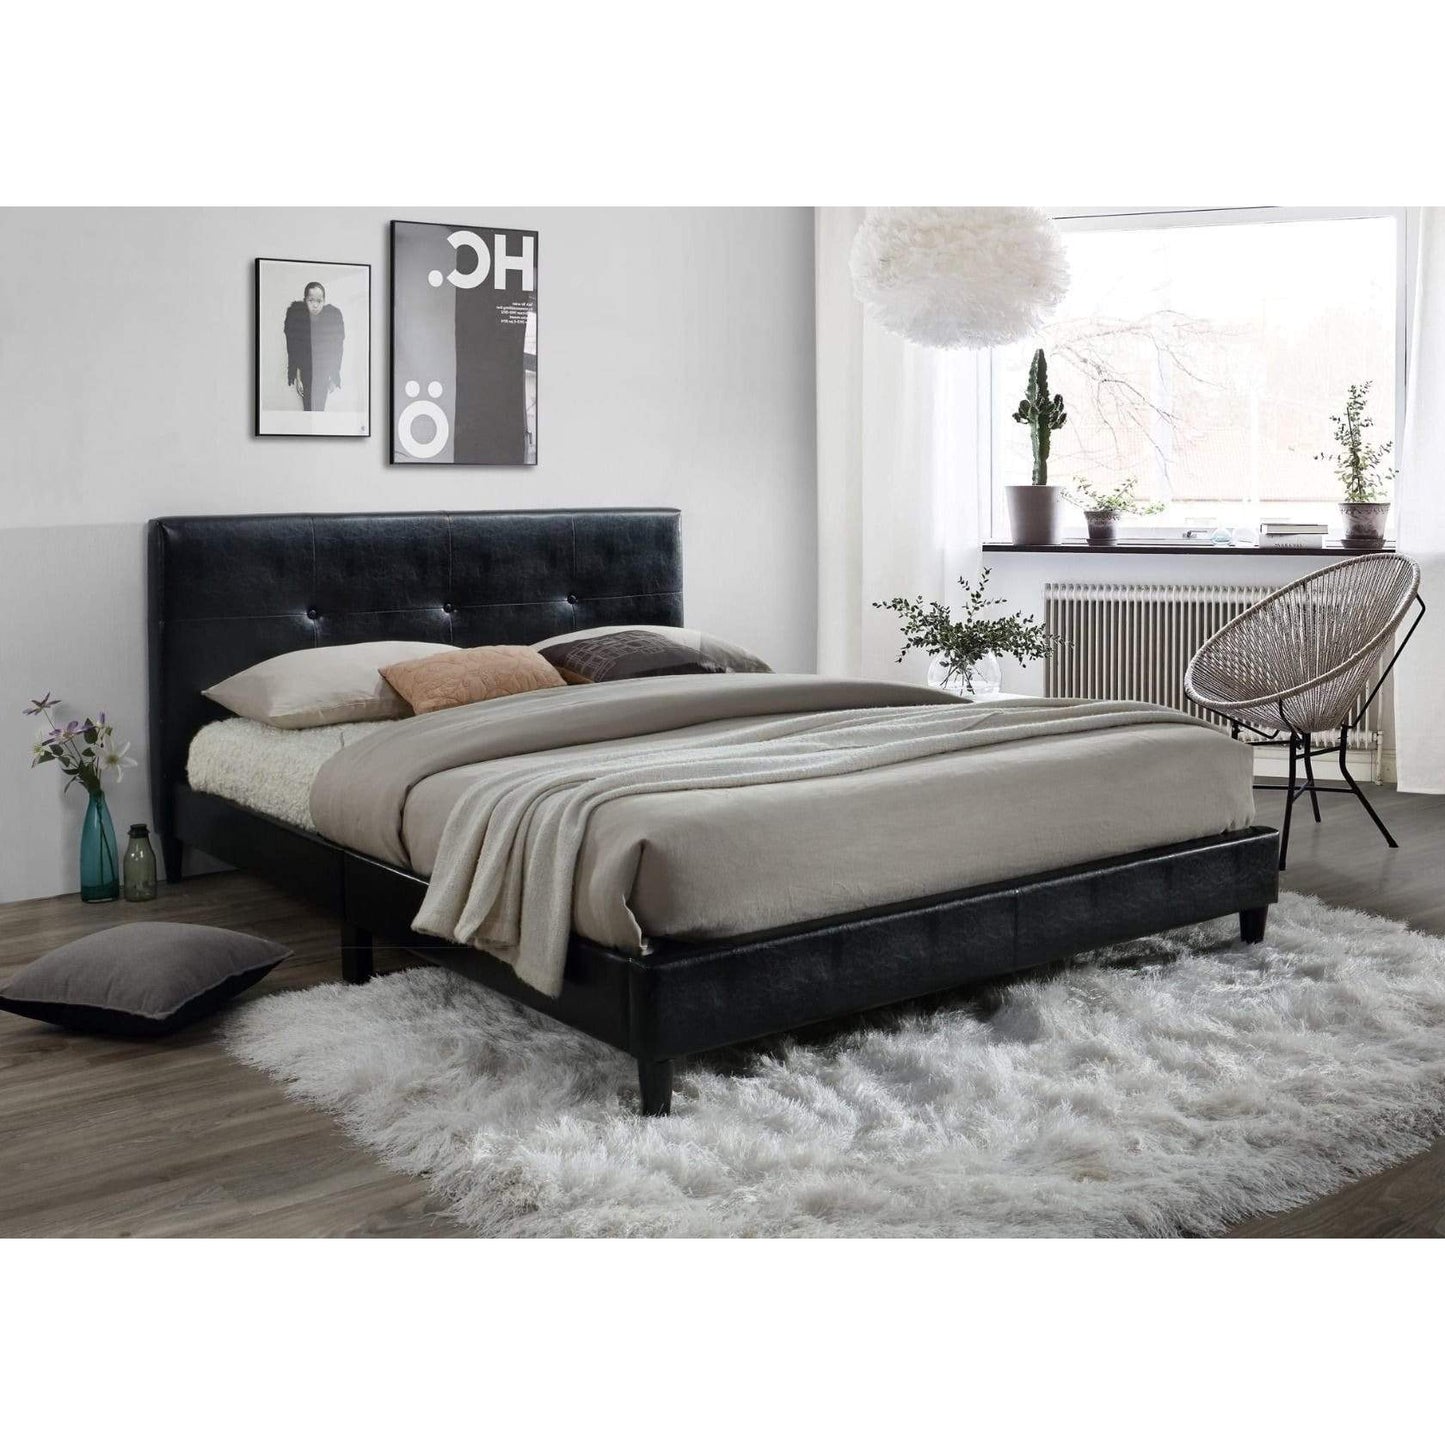 MYCO Bed Jester Tufted Black Full Platform Bed in Faux Leather